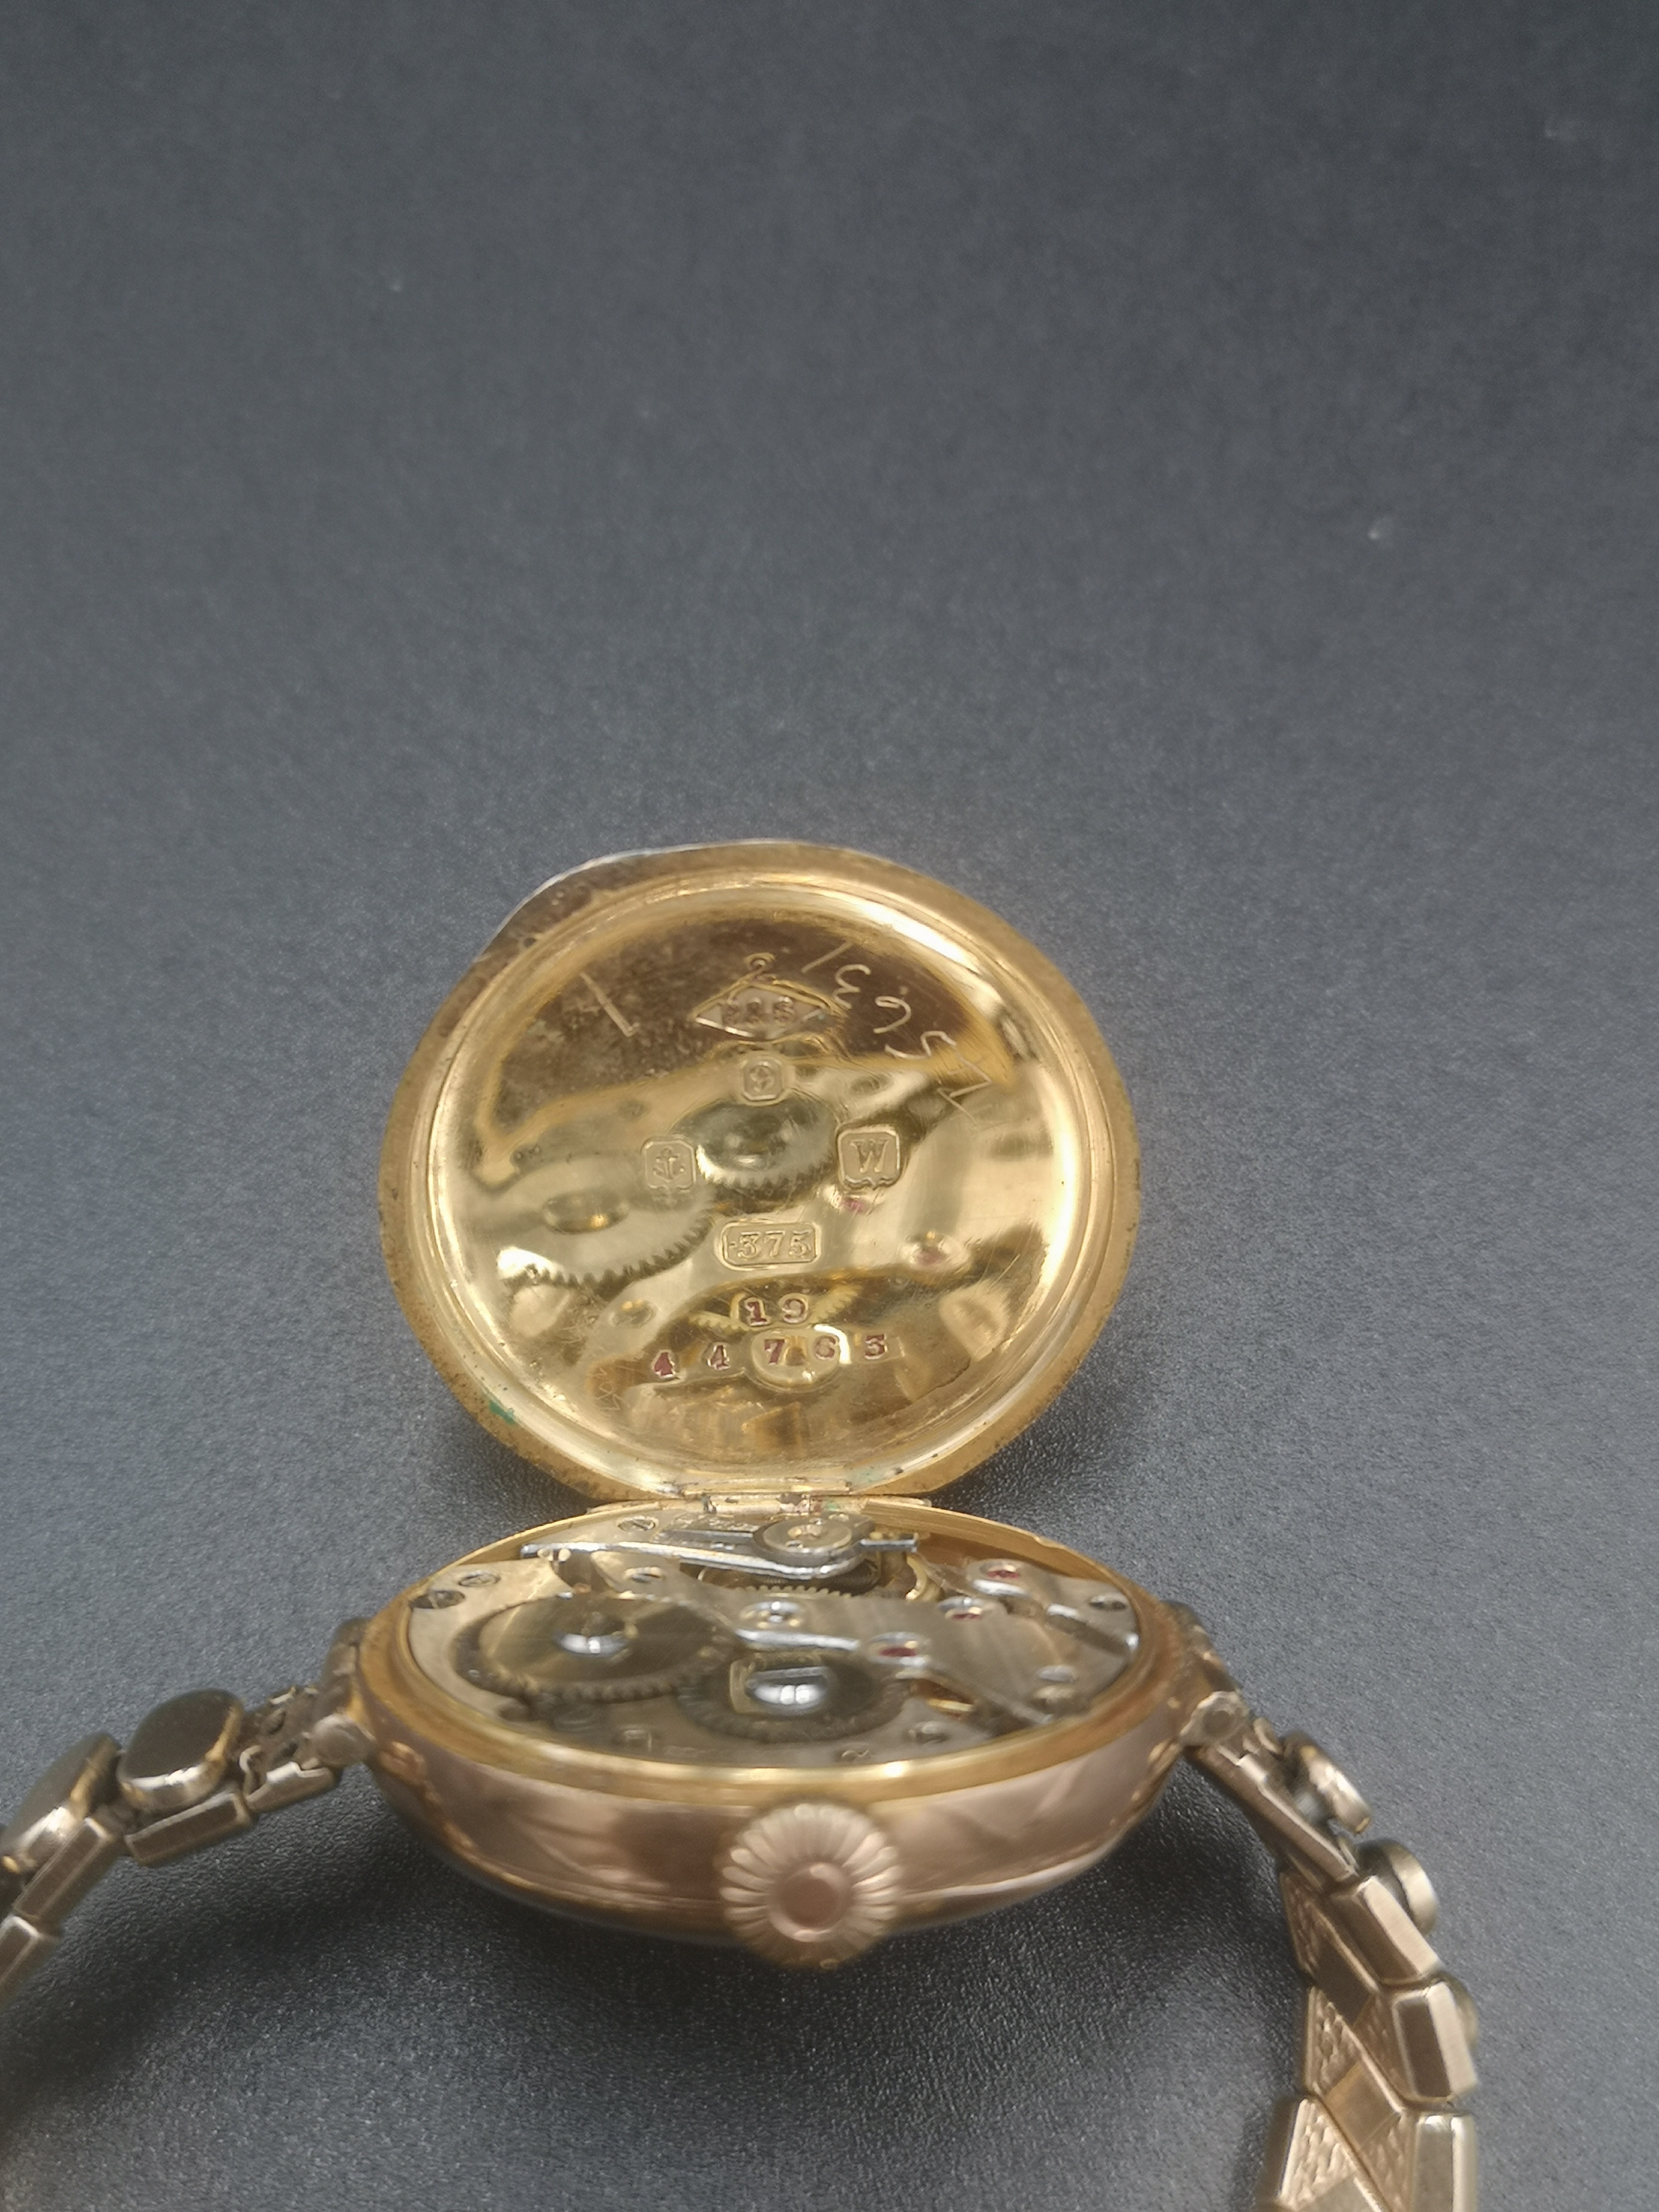 Ladies wrist watch with enamel face - Image 3 of 5